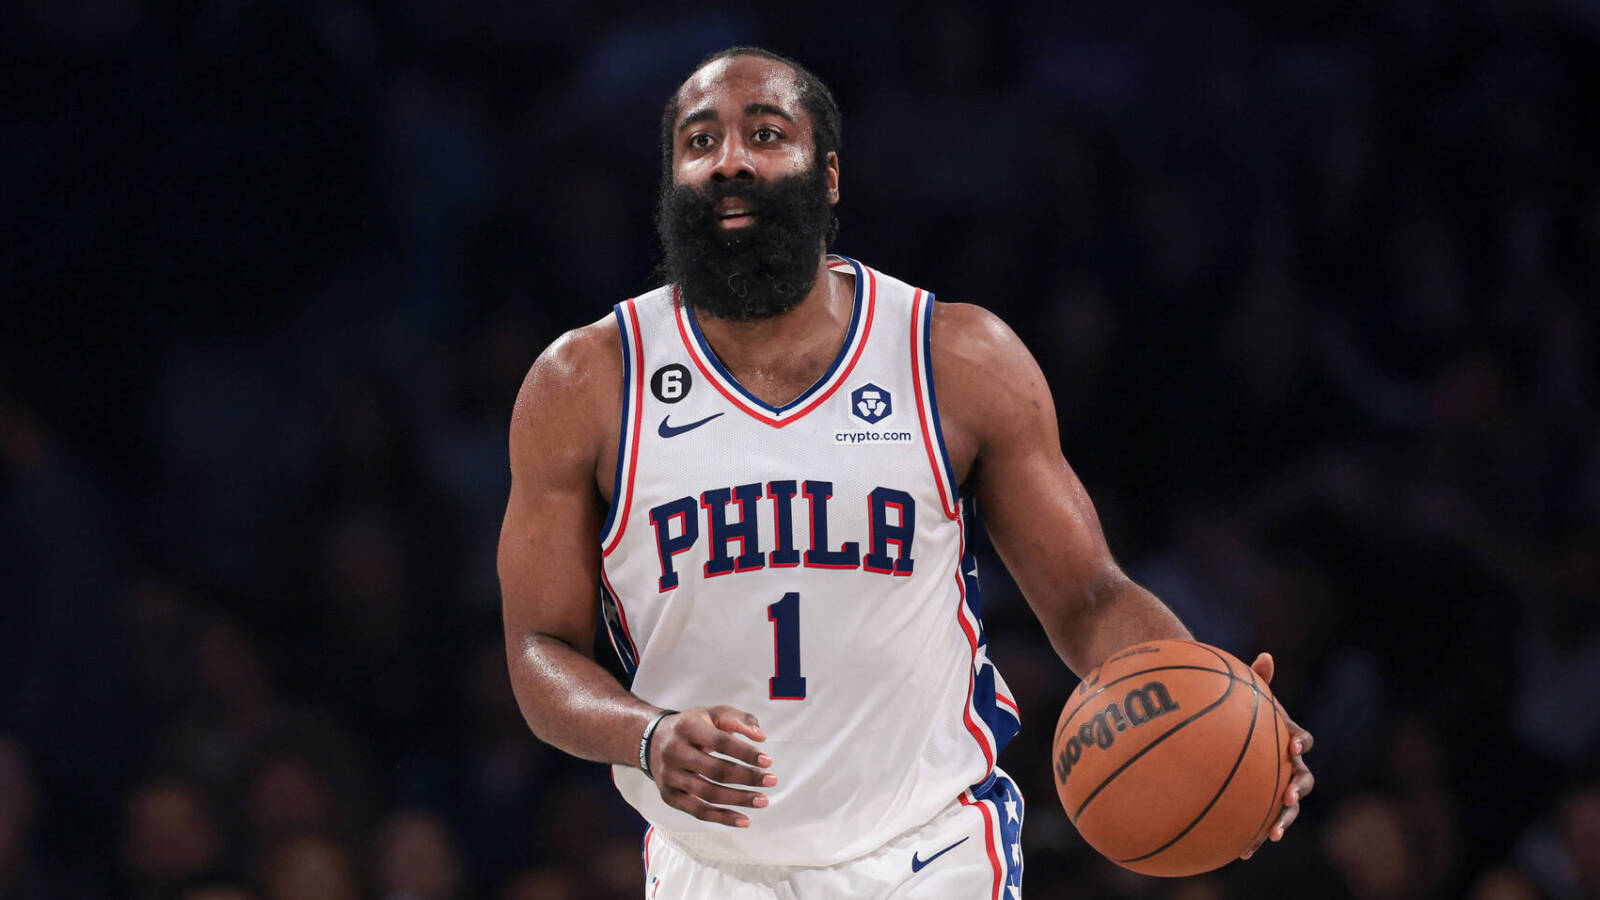 All-Star 'snub' started James Harden's discontent with 76ers